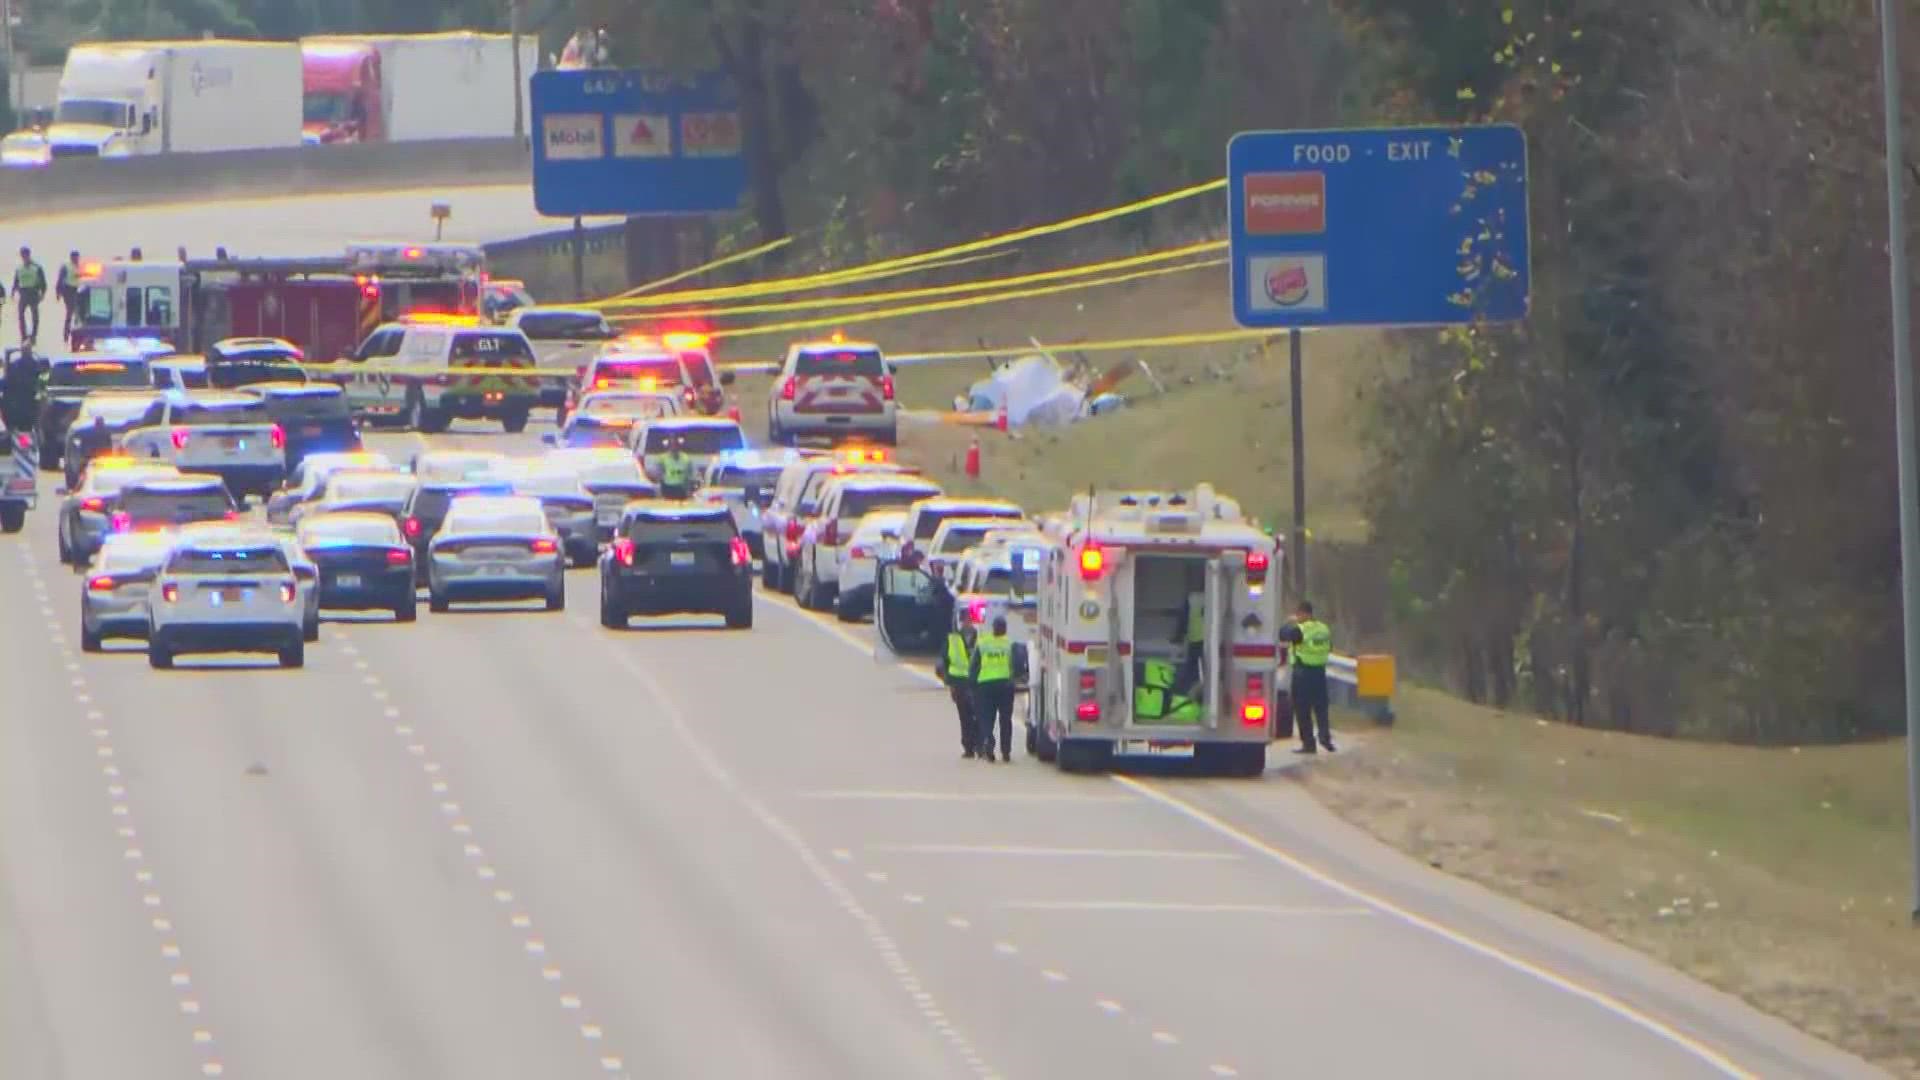 WBTV said its helicopter crashed on the side of I-77 in Charlotte. The station said meteorologist Jason Myers and pilot Chip Tayag died as a result.